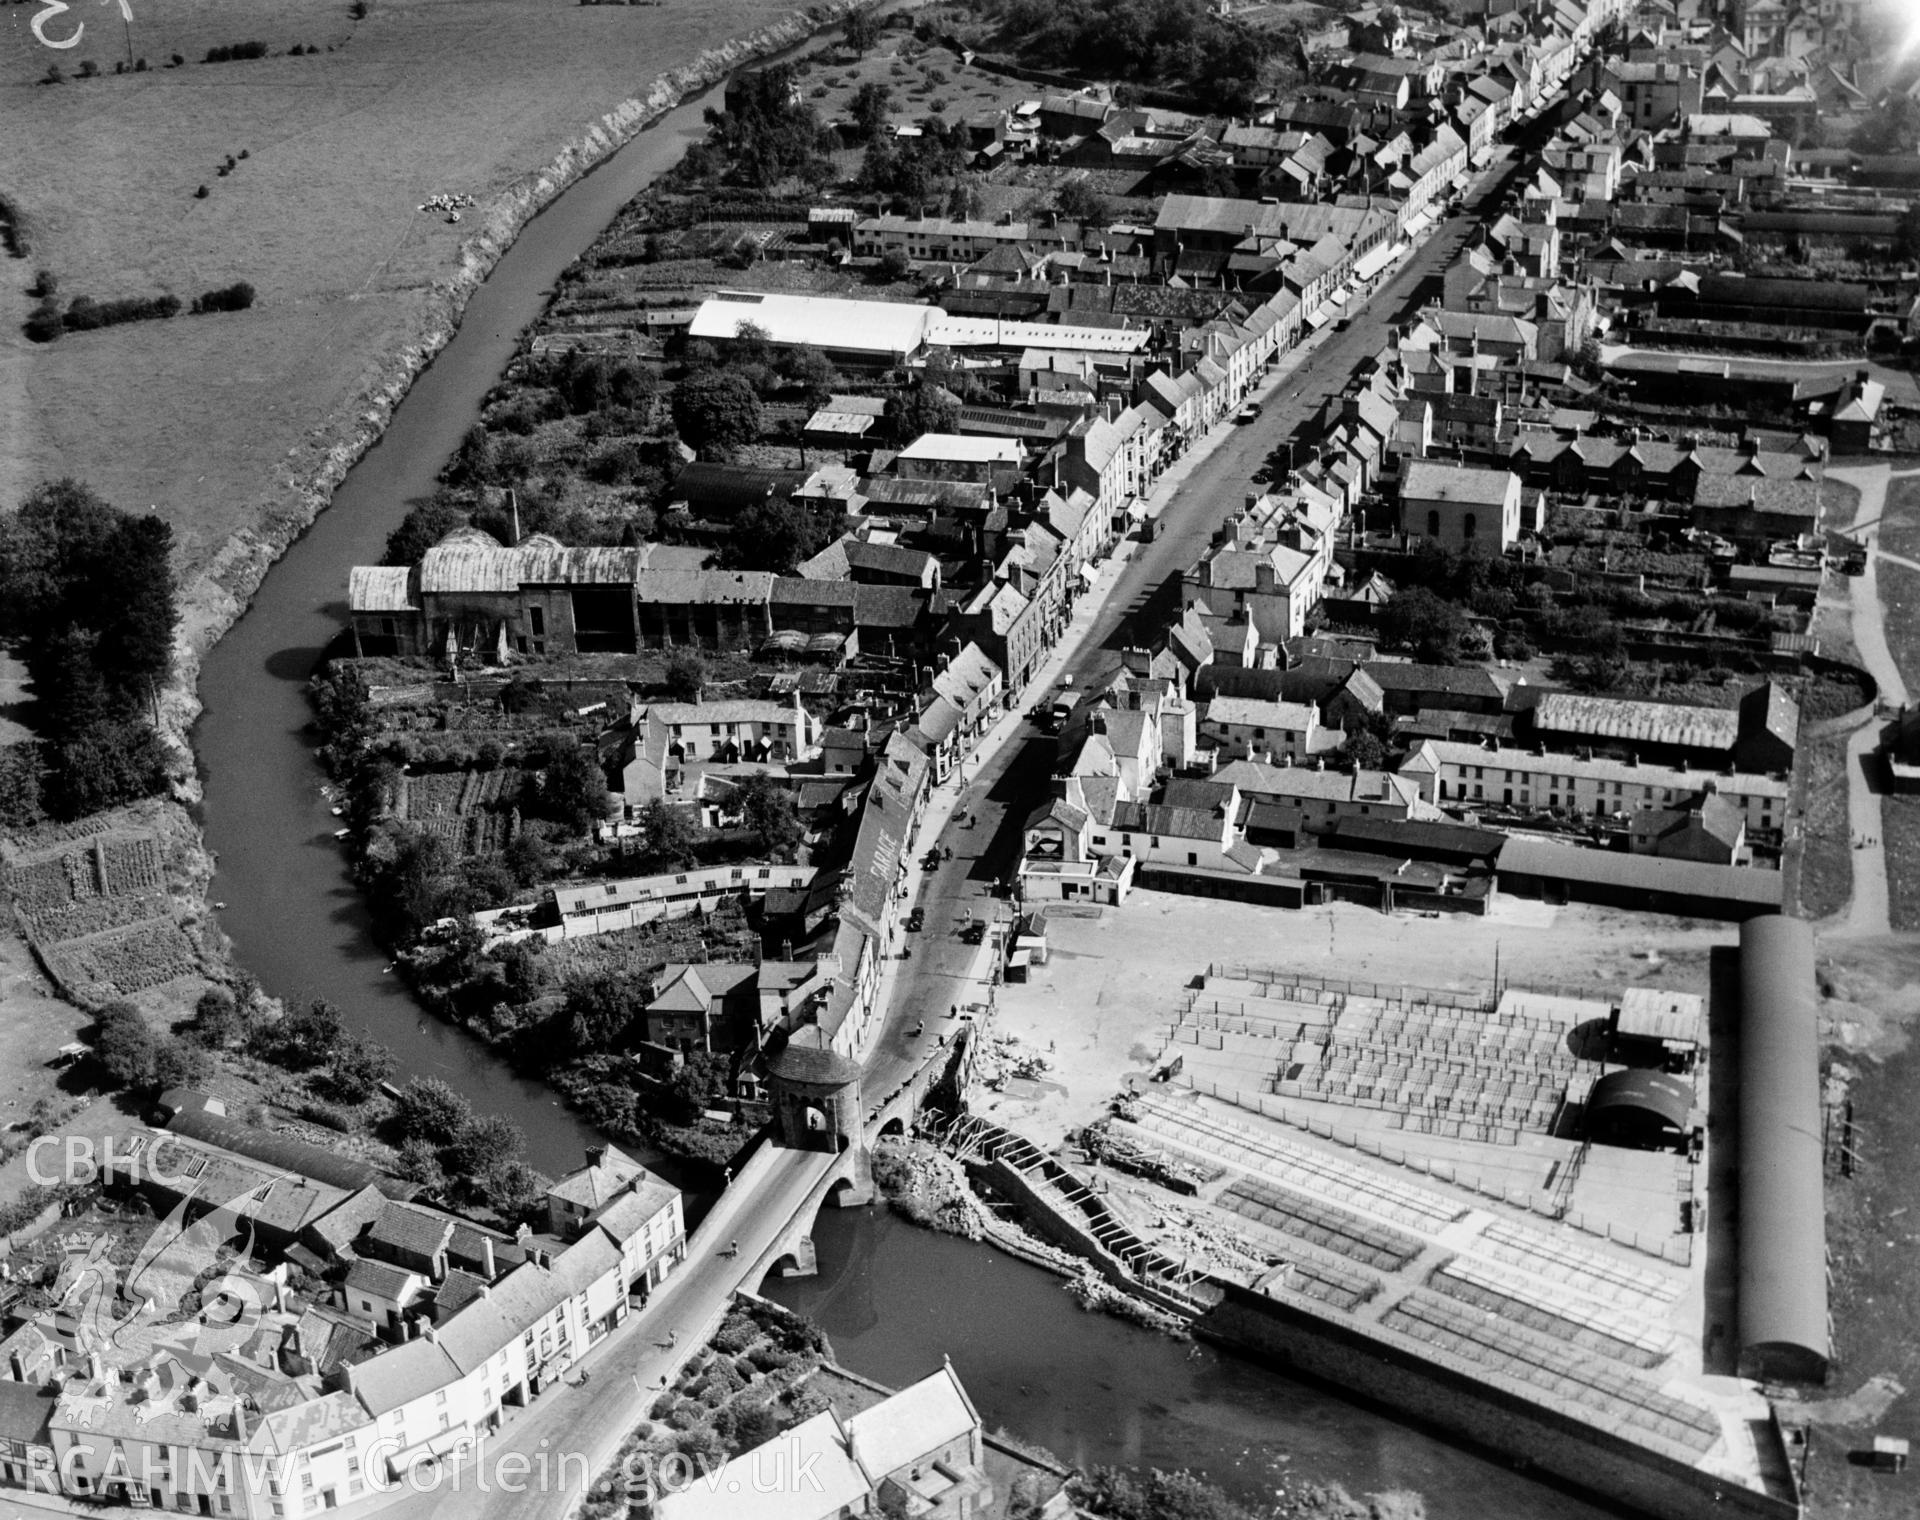 View of Monmouth showing Monnow Bridge,  Monnow Street and Cattle Market, oblique aerial view. 5?x4? black and white glass plate negative.